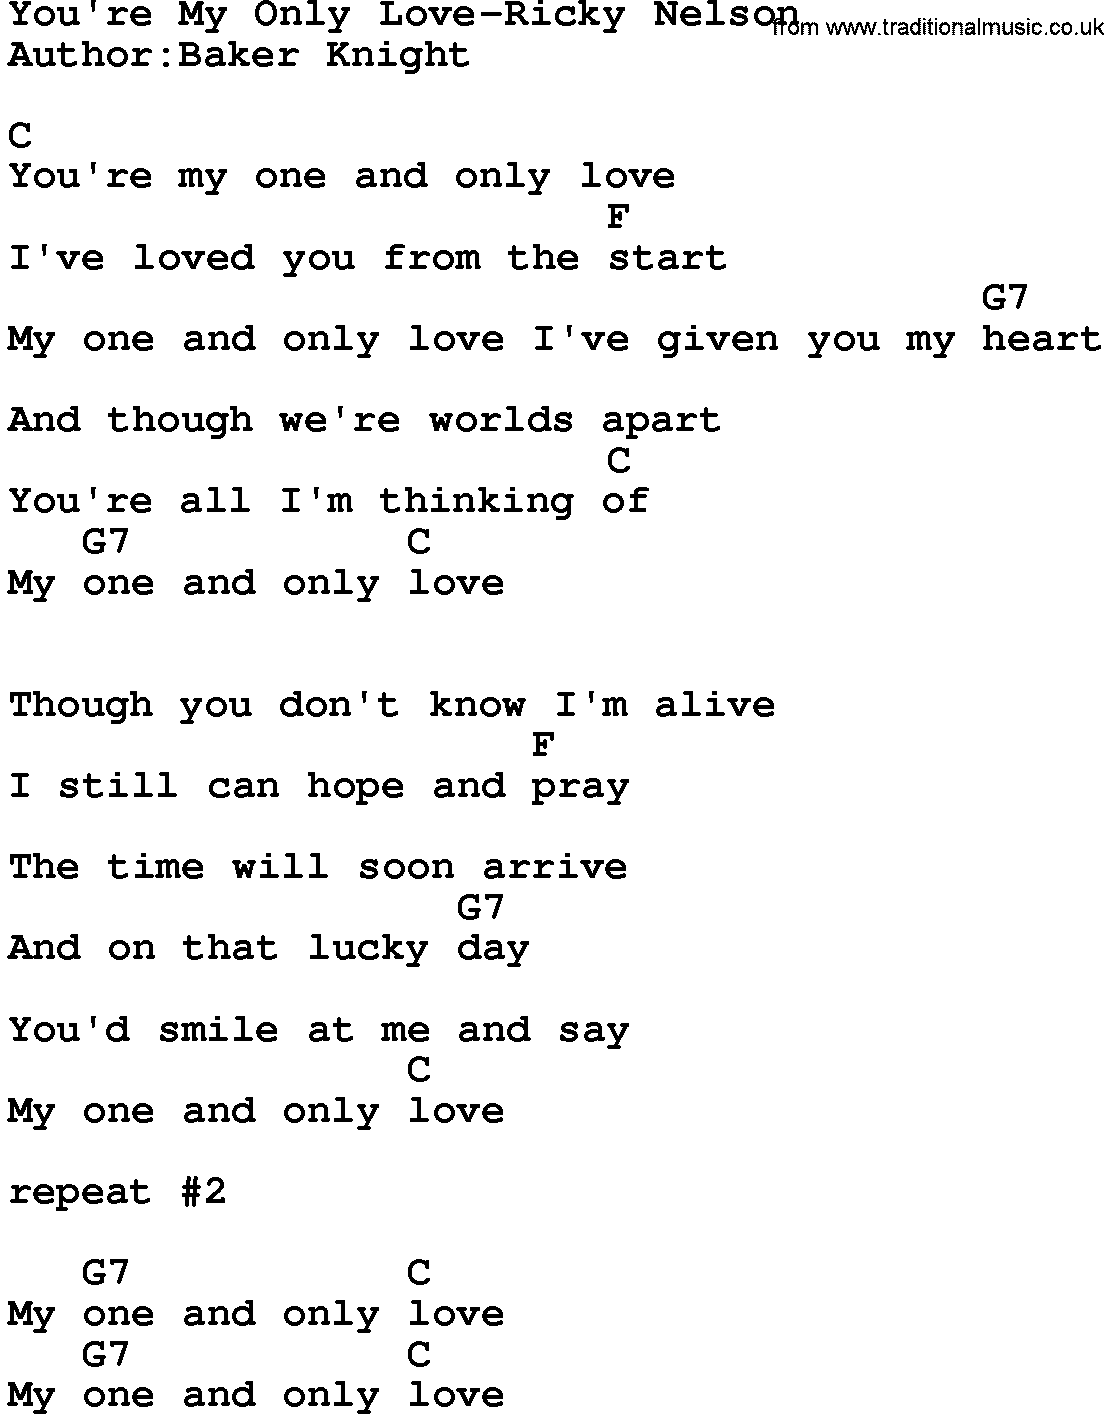 Country music song: You're My Only Love-Ricky Nelson lyrics and chords